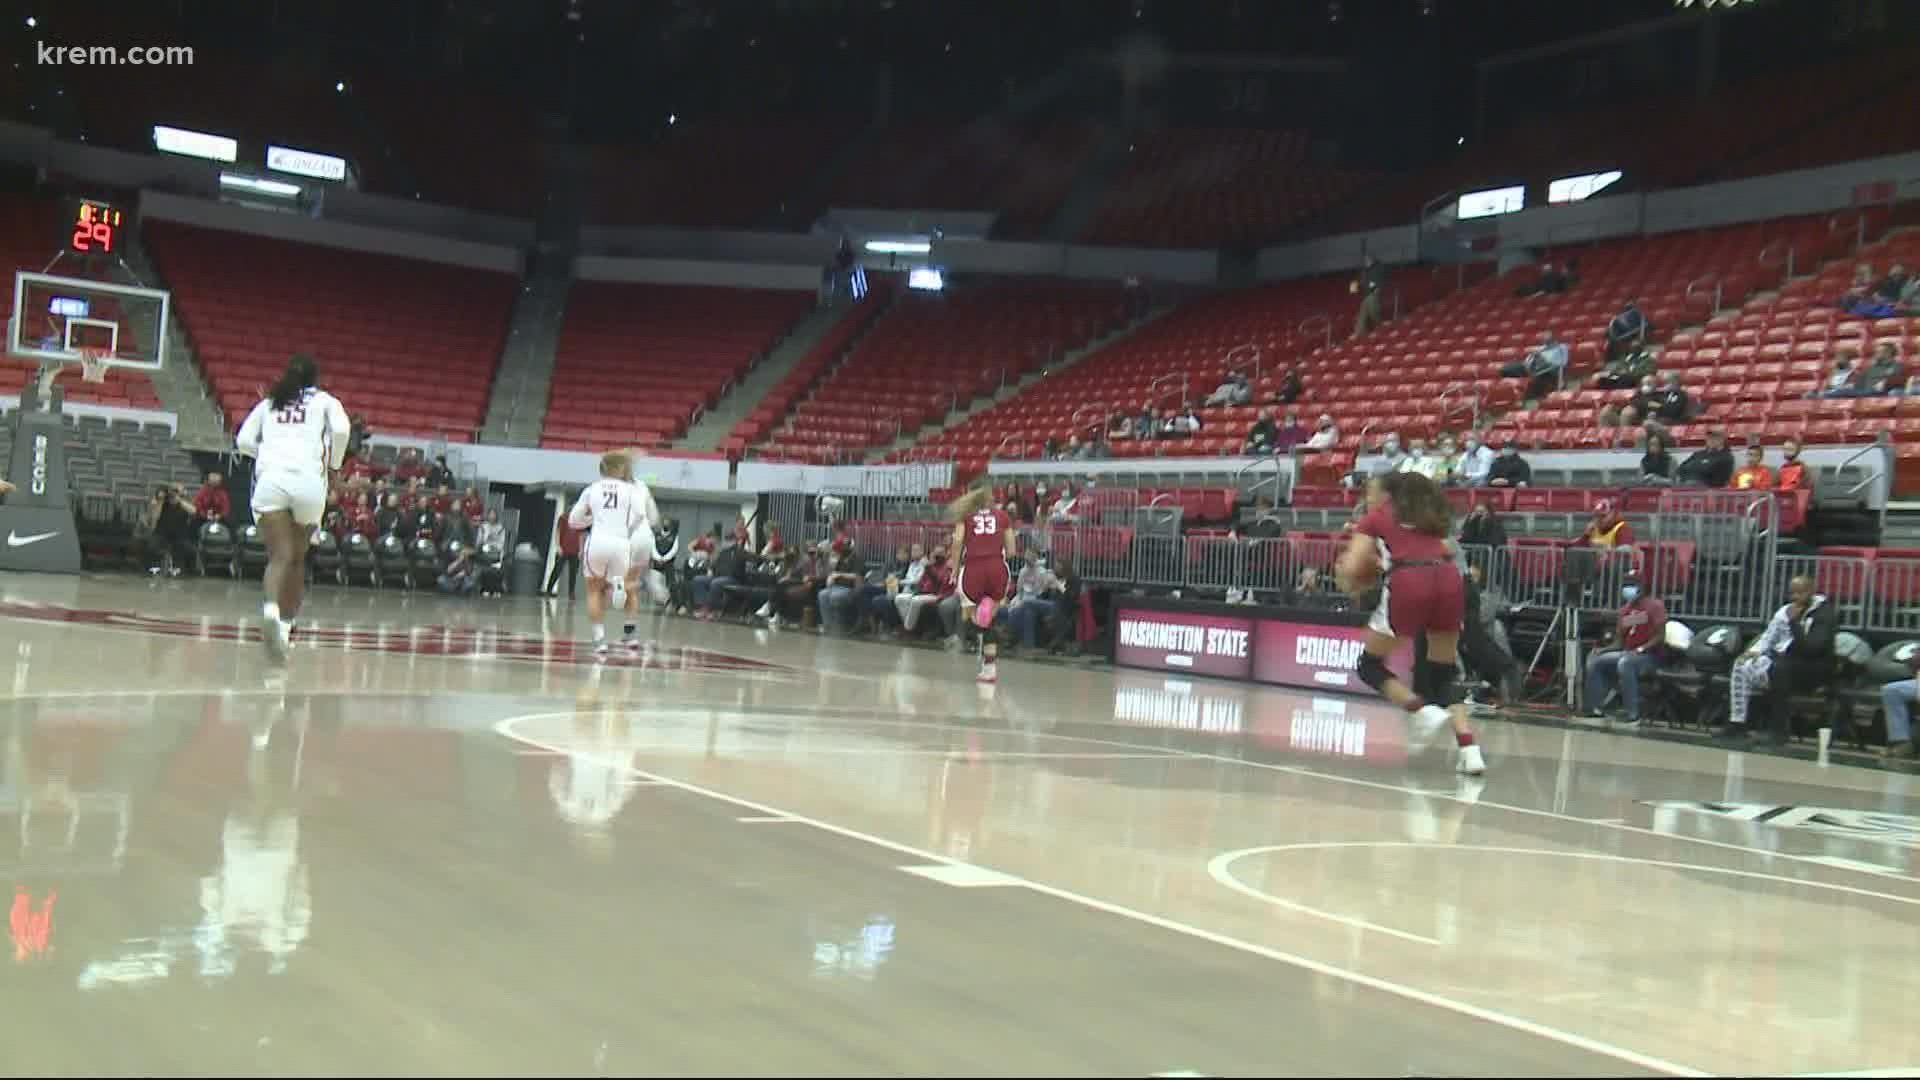 The Washington State University women's basketball team lost to Stanford 82-44 Sunday.